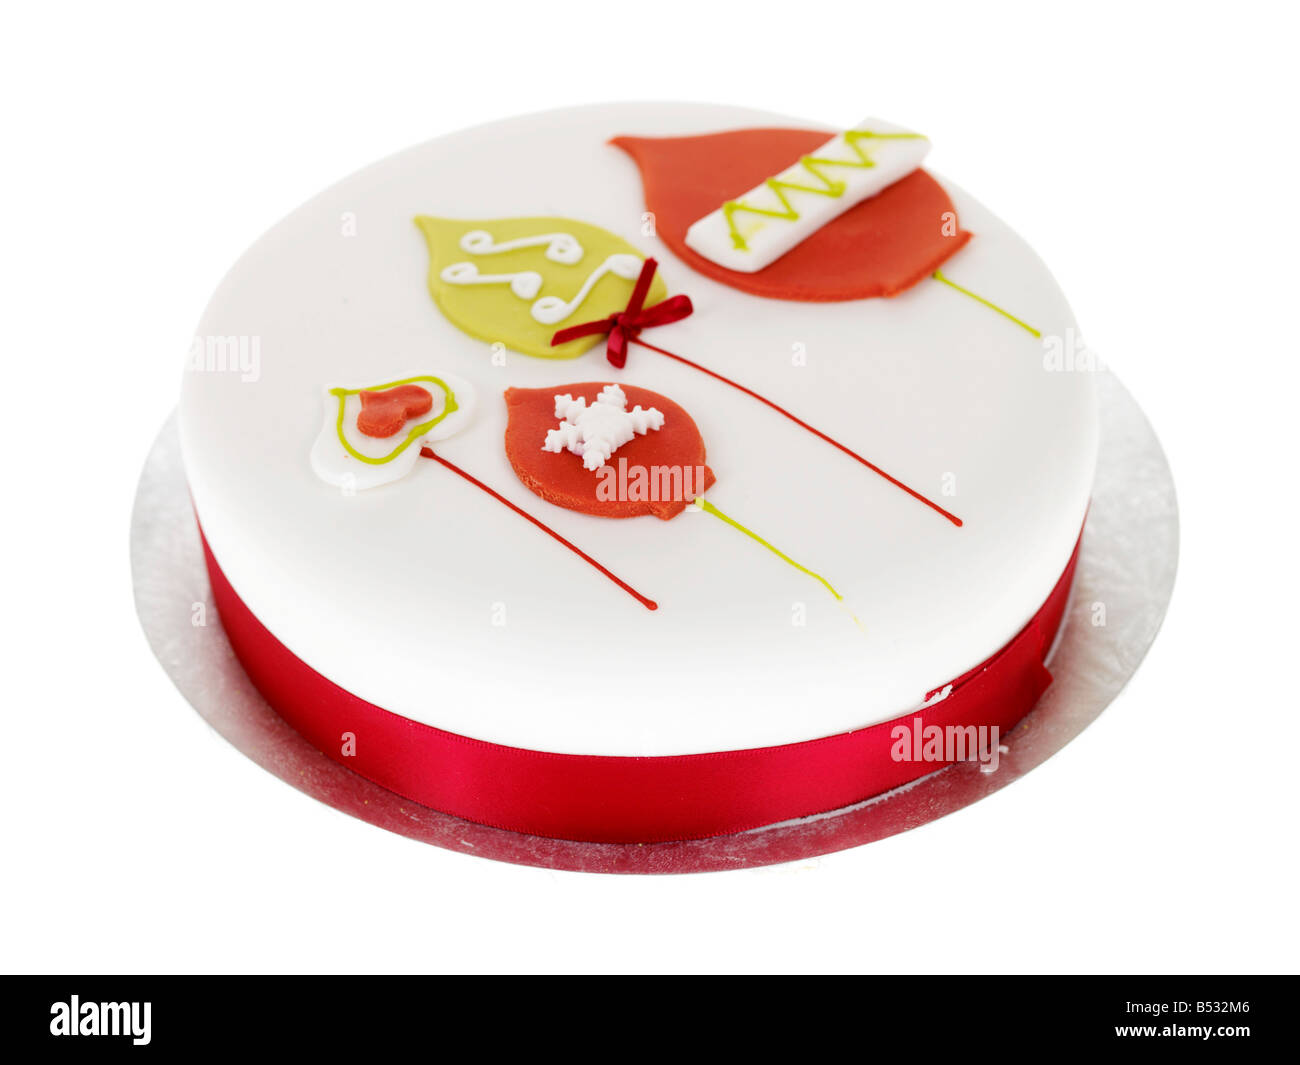 Traditional Rich Fruit Cake With White Icing Decorated For Christmas Isolated Against A White Background With No People And A Clipping Path Stock Photo